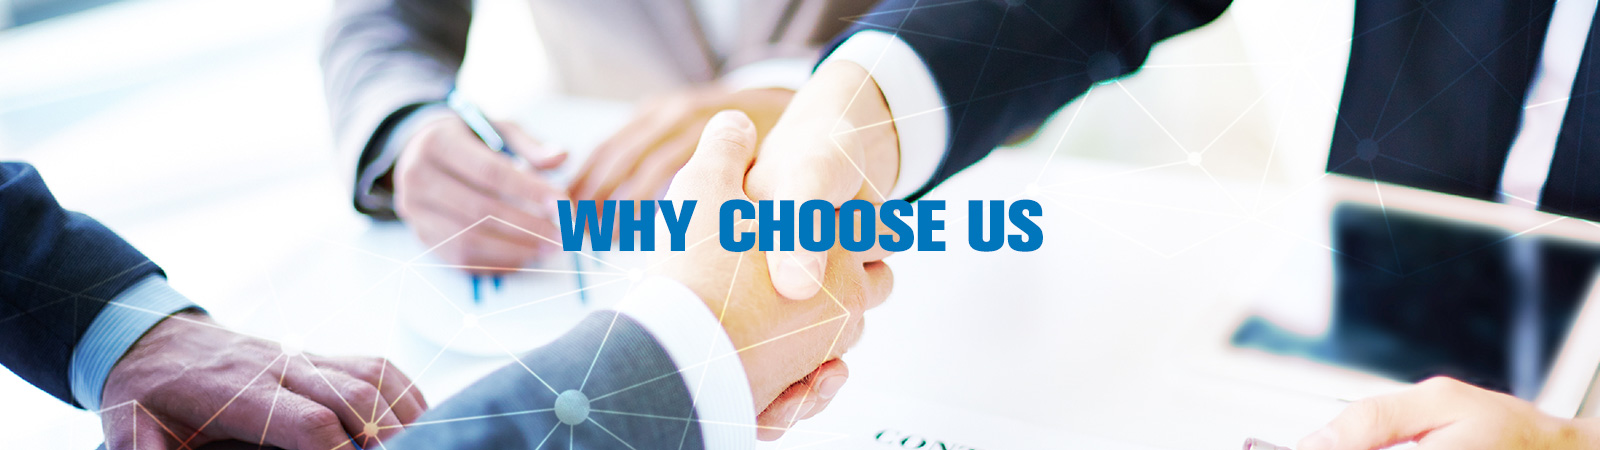 Click-By-SEO-Why-Choose-Us